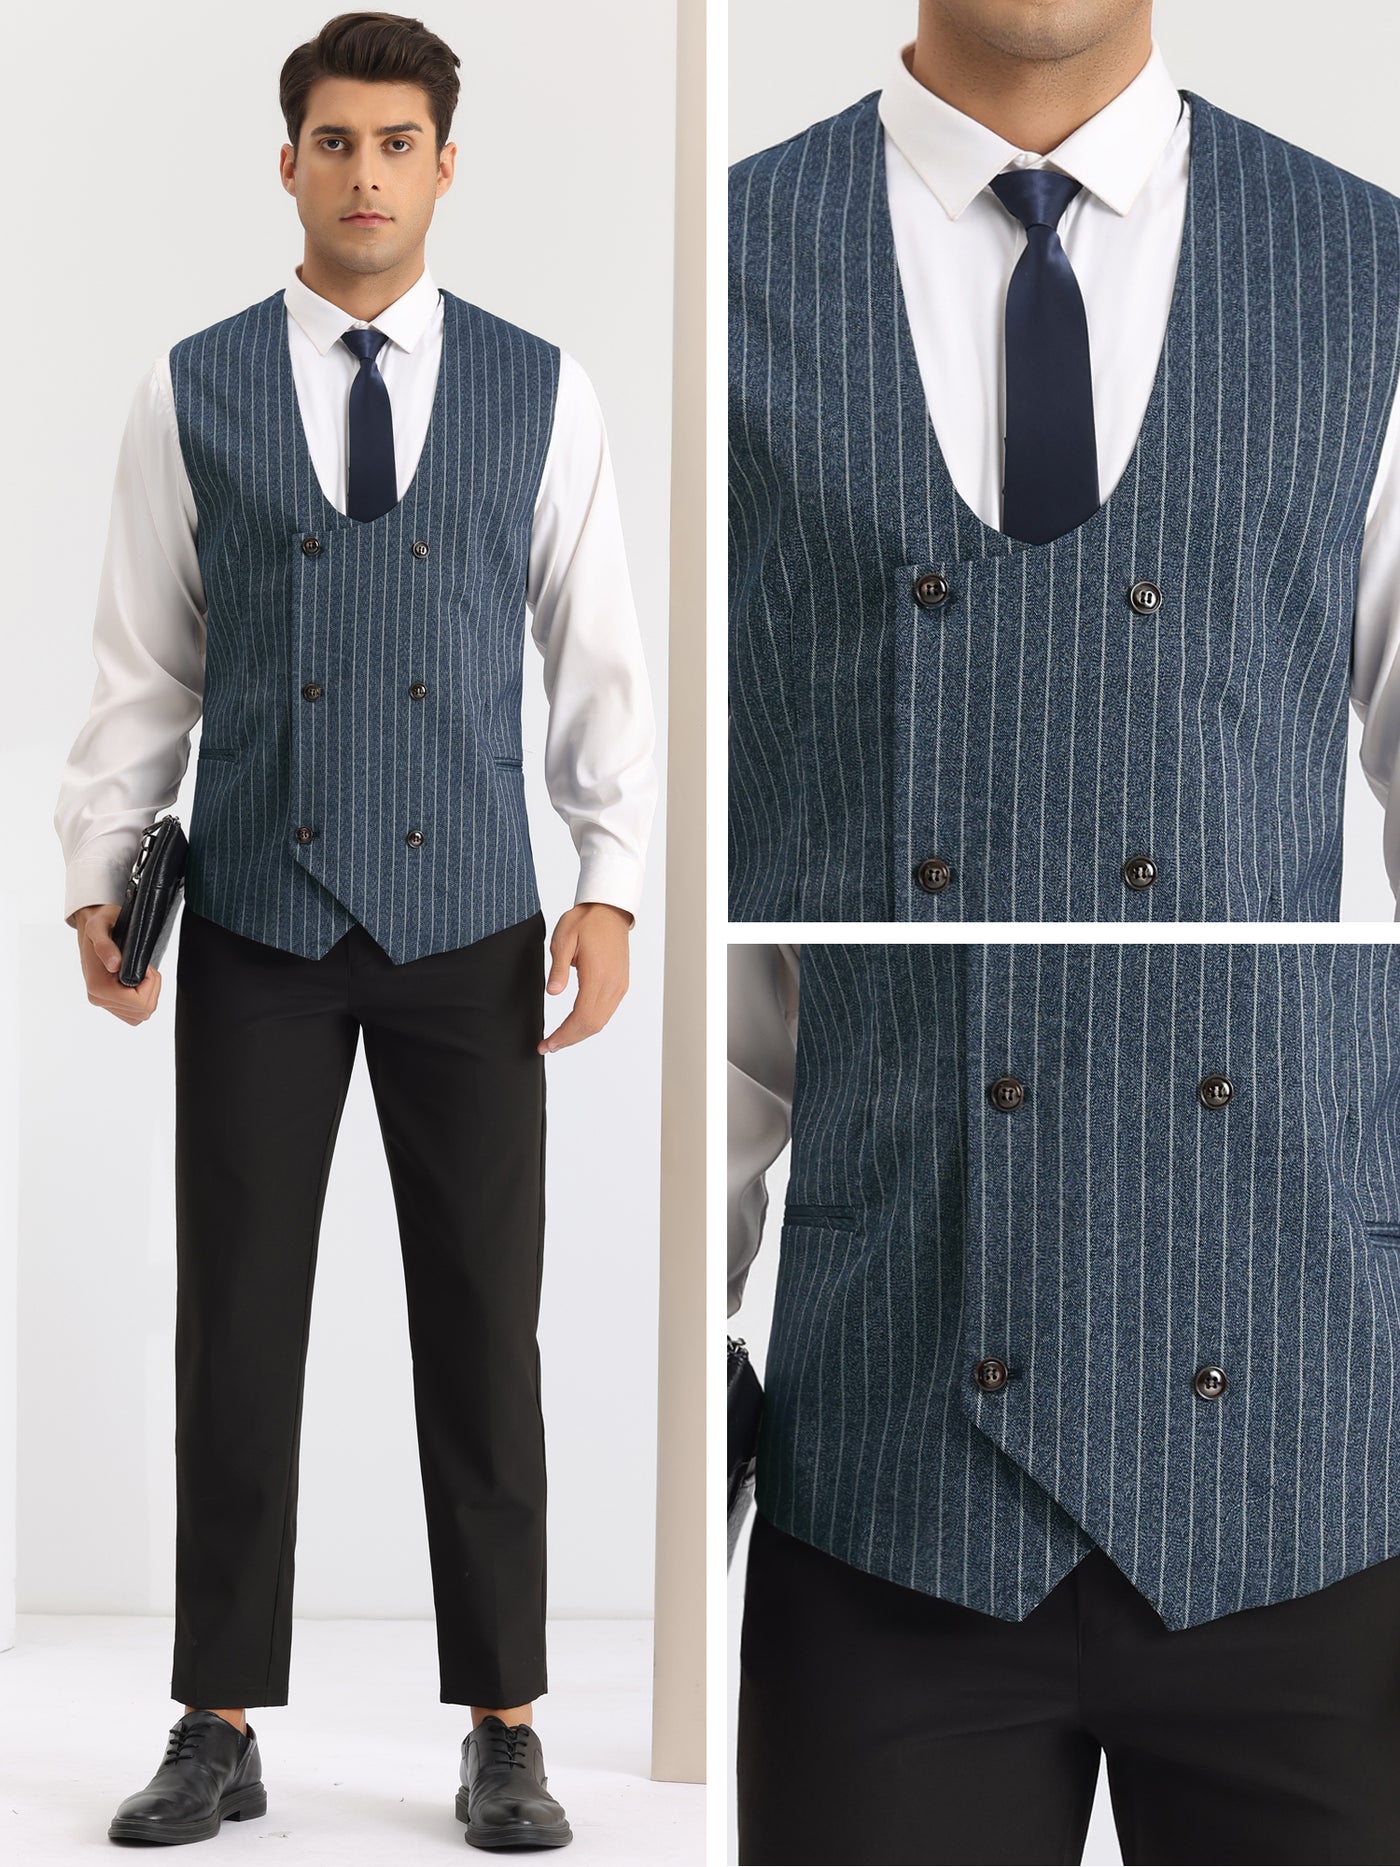 Bublédon Striped Waistcoat for Men's Slim Fit Double Breasted Formal Dress Suit Vests